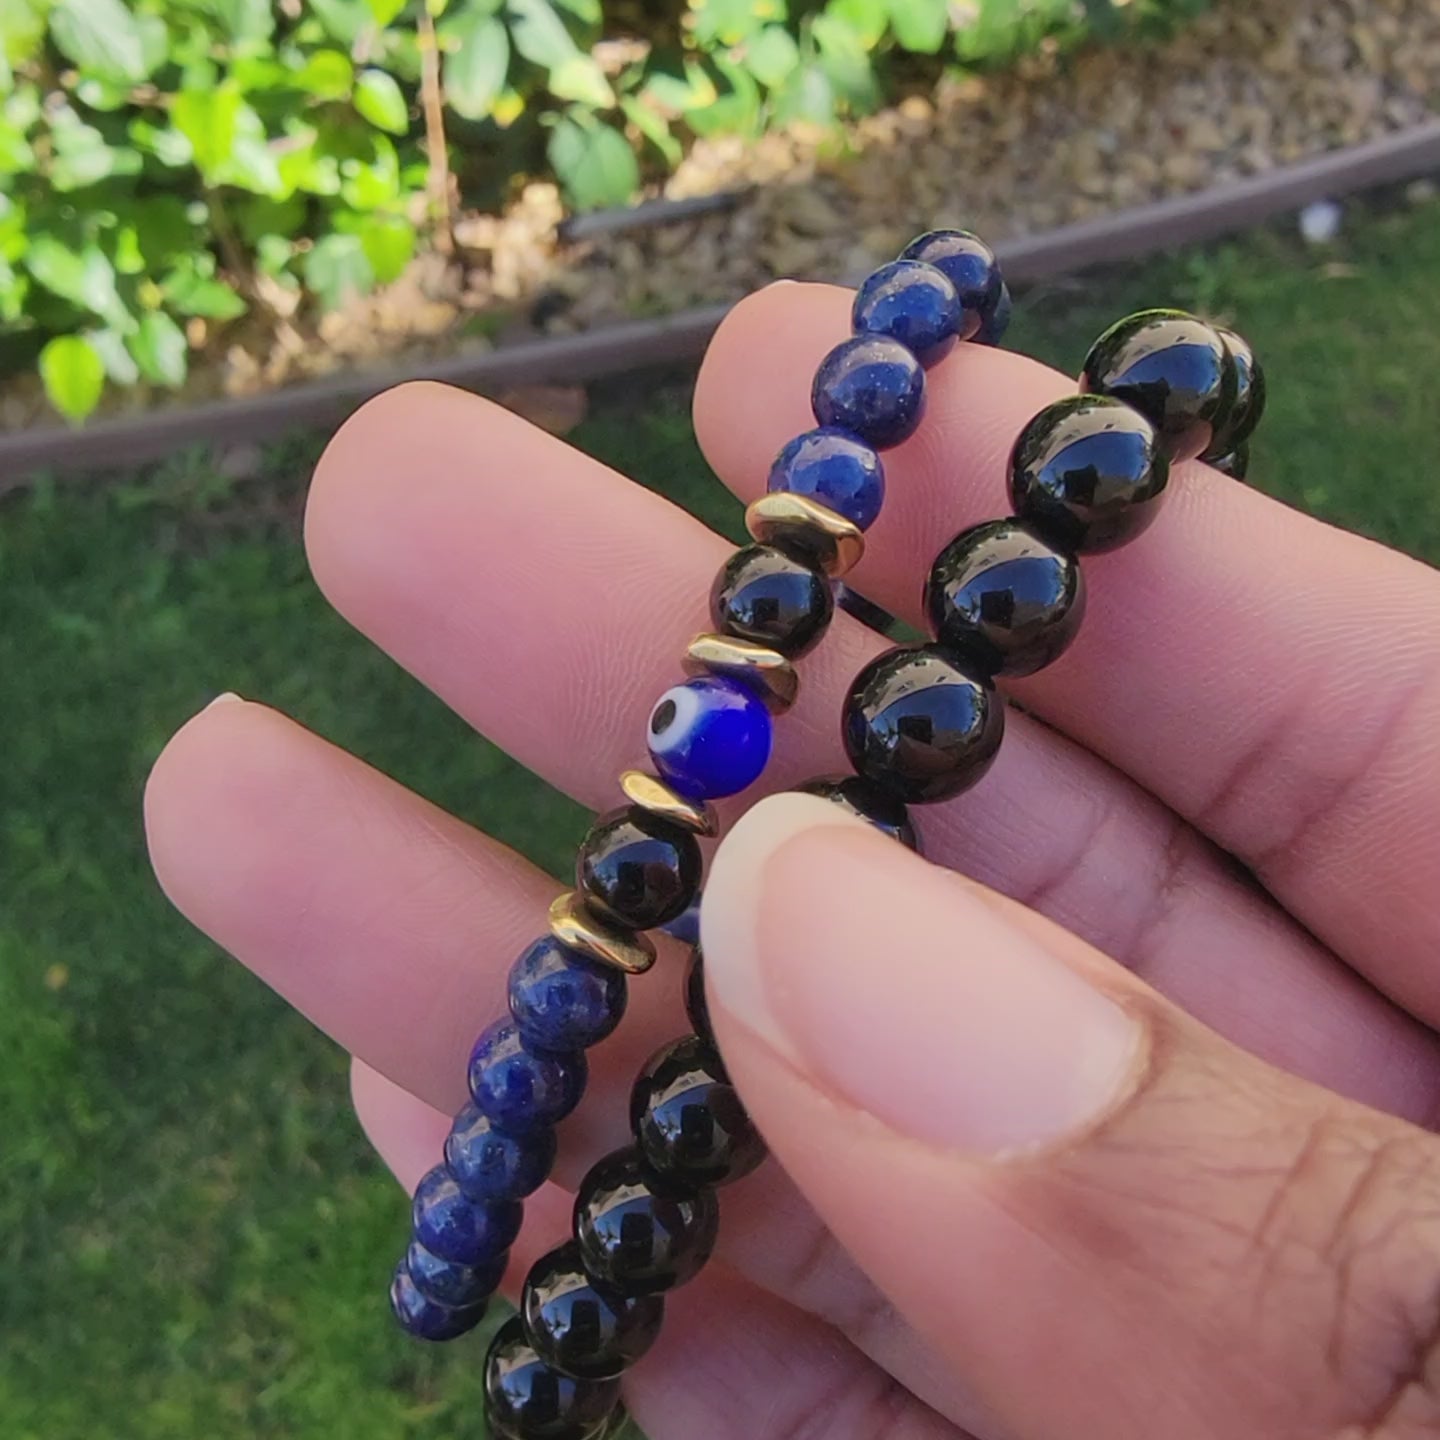 Lapis Lazuli, Black Agate, Evil Eye, Inner Power, Inner Truth, Protection, Strength, Emotional Balance, Stability, Handcrafted, Bracelet, 6mm Beads, Celestial Blue, Grounding Stone, Cleansing Effect, Amulet, Negative Energy Absorption, Security,